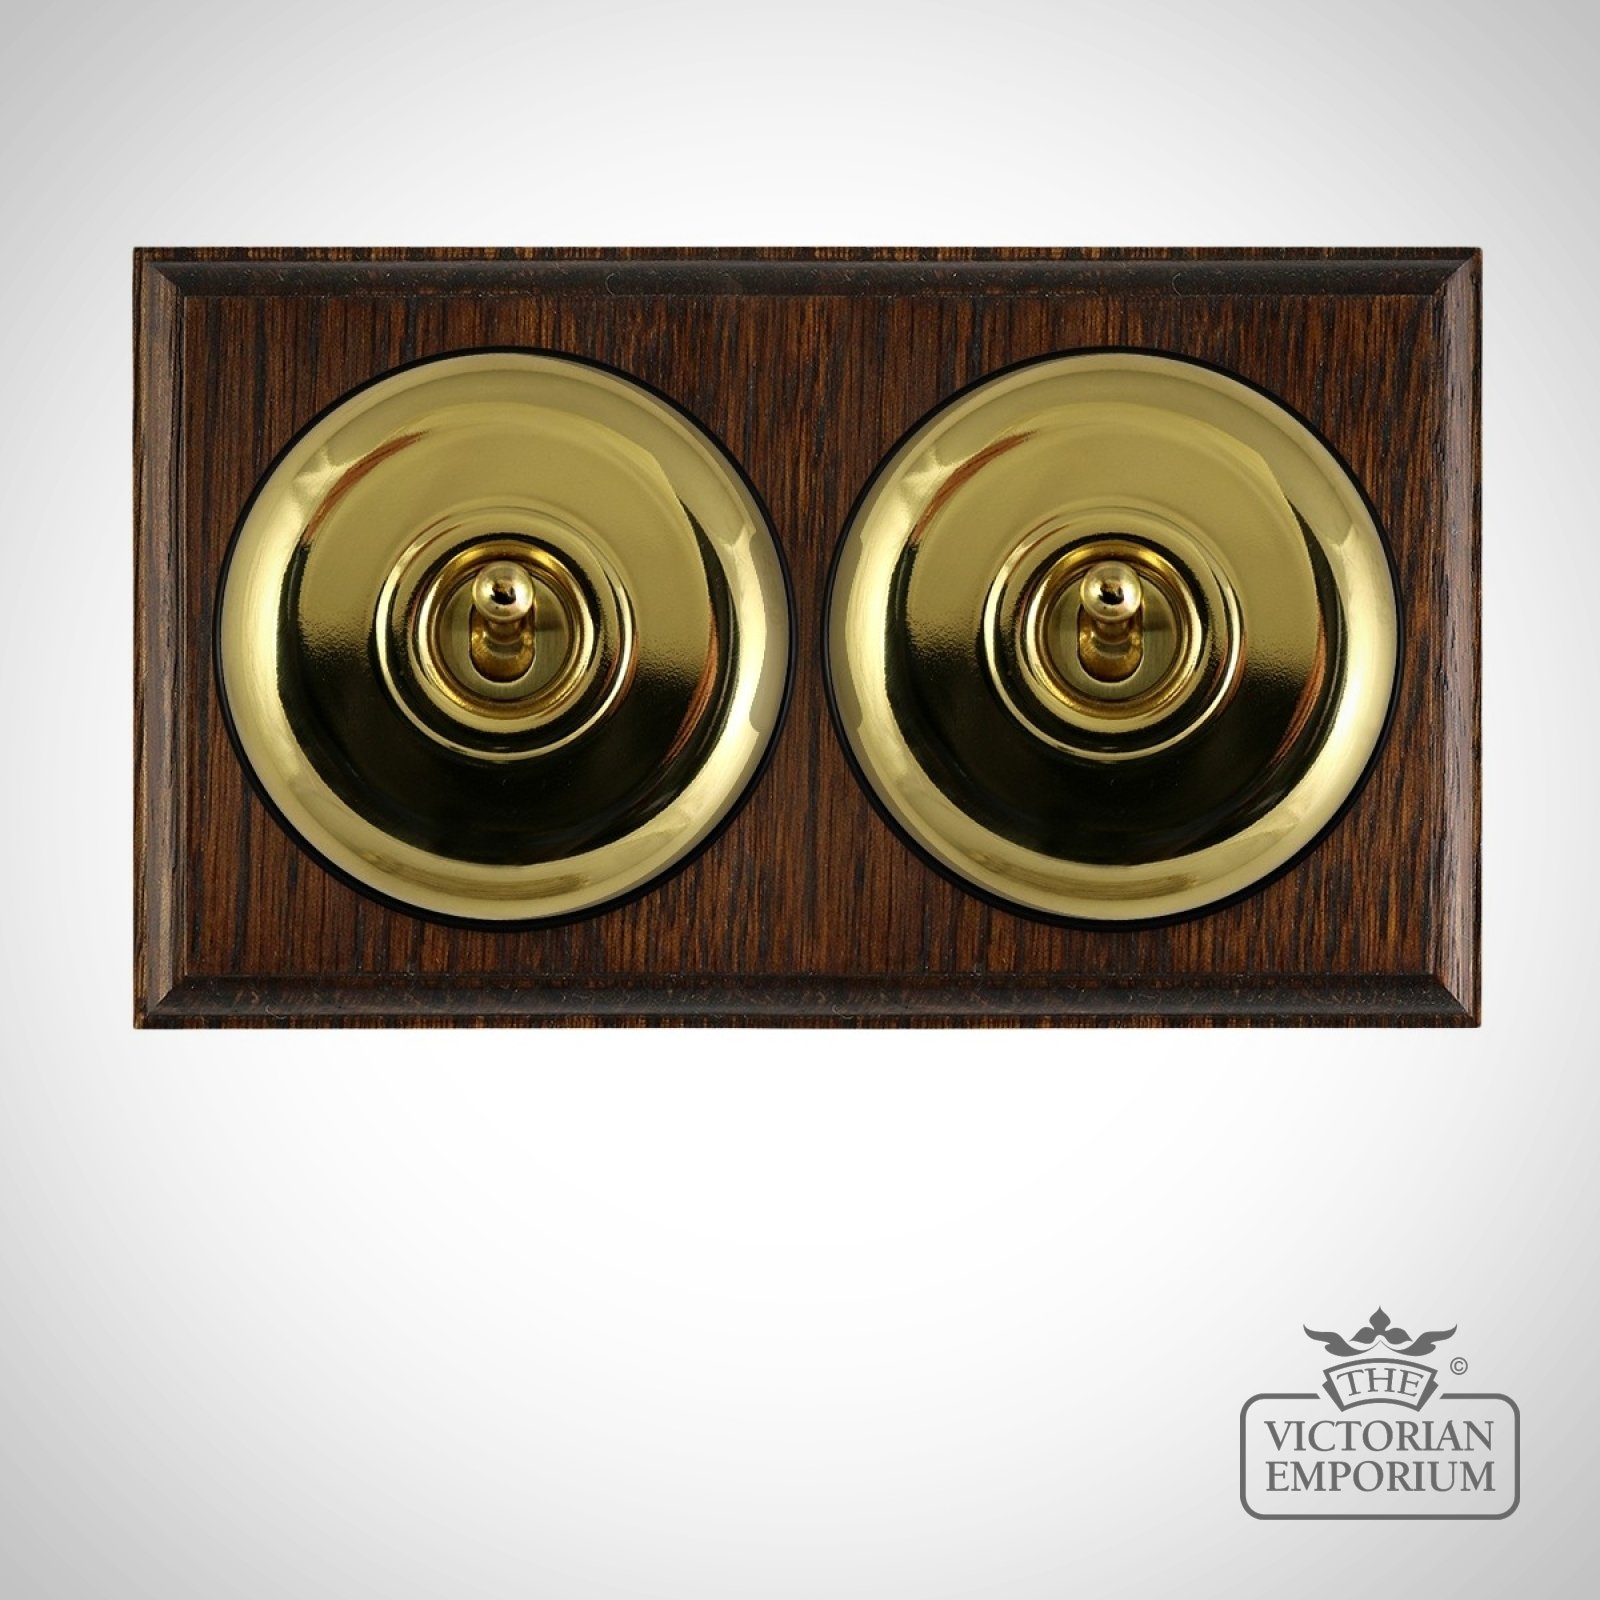 2 Gang Period Light Switch - plain in a choice of finishes